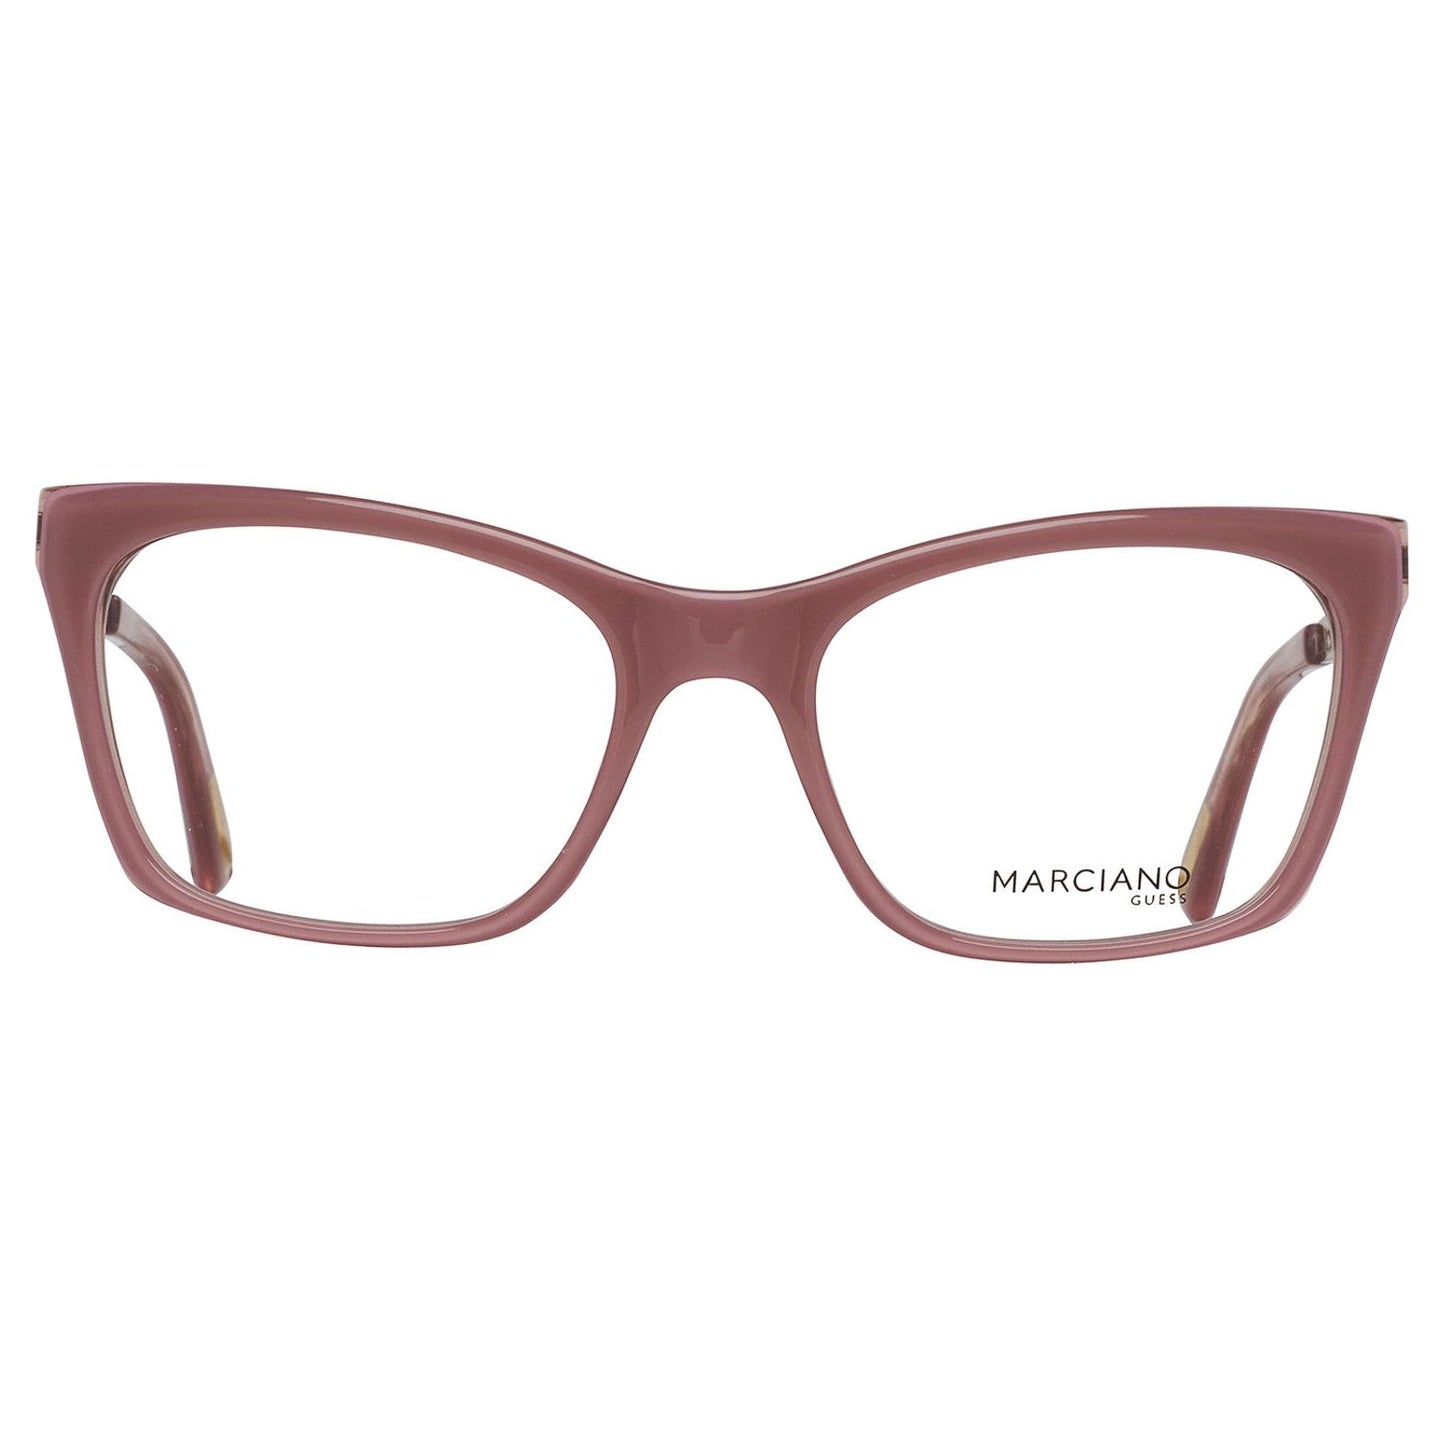 MARCIANO By GUESS EYEWEAR MARCIANO BY GUESS MOD. GM0267 53072 SUNGLASSES & EYEWEAR marciano-by-guess-mod-gm0267-53072